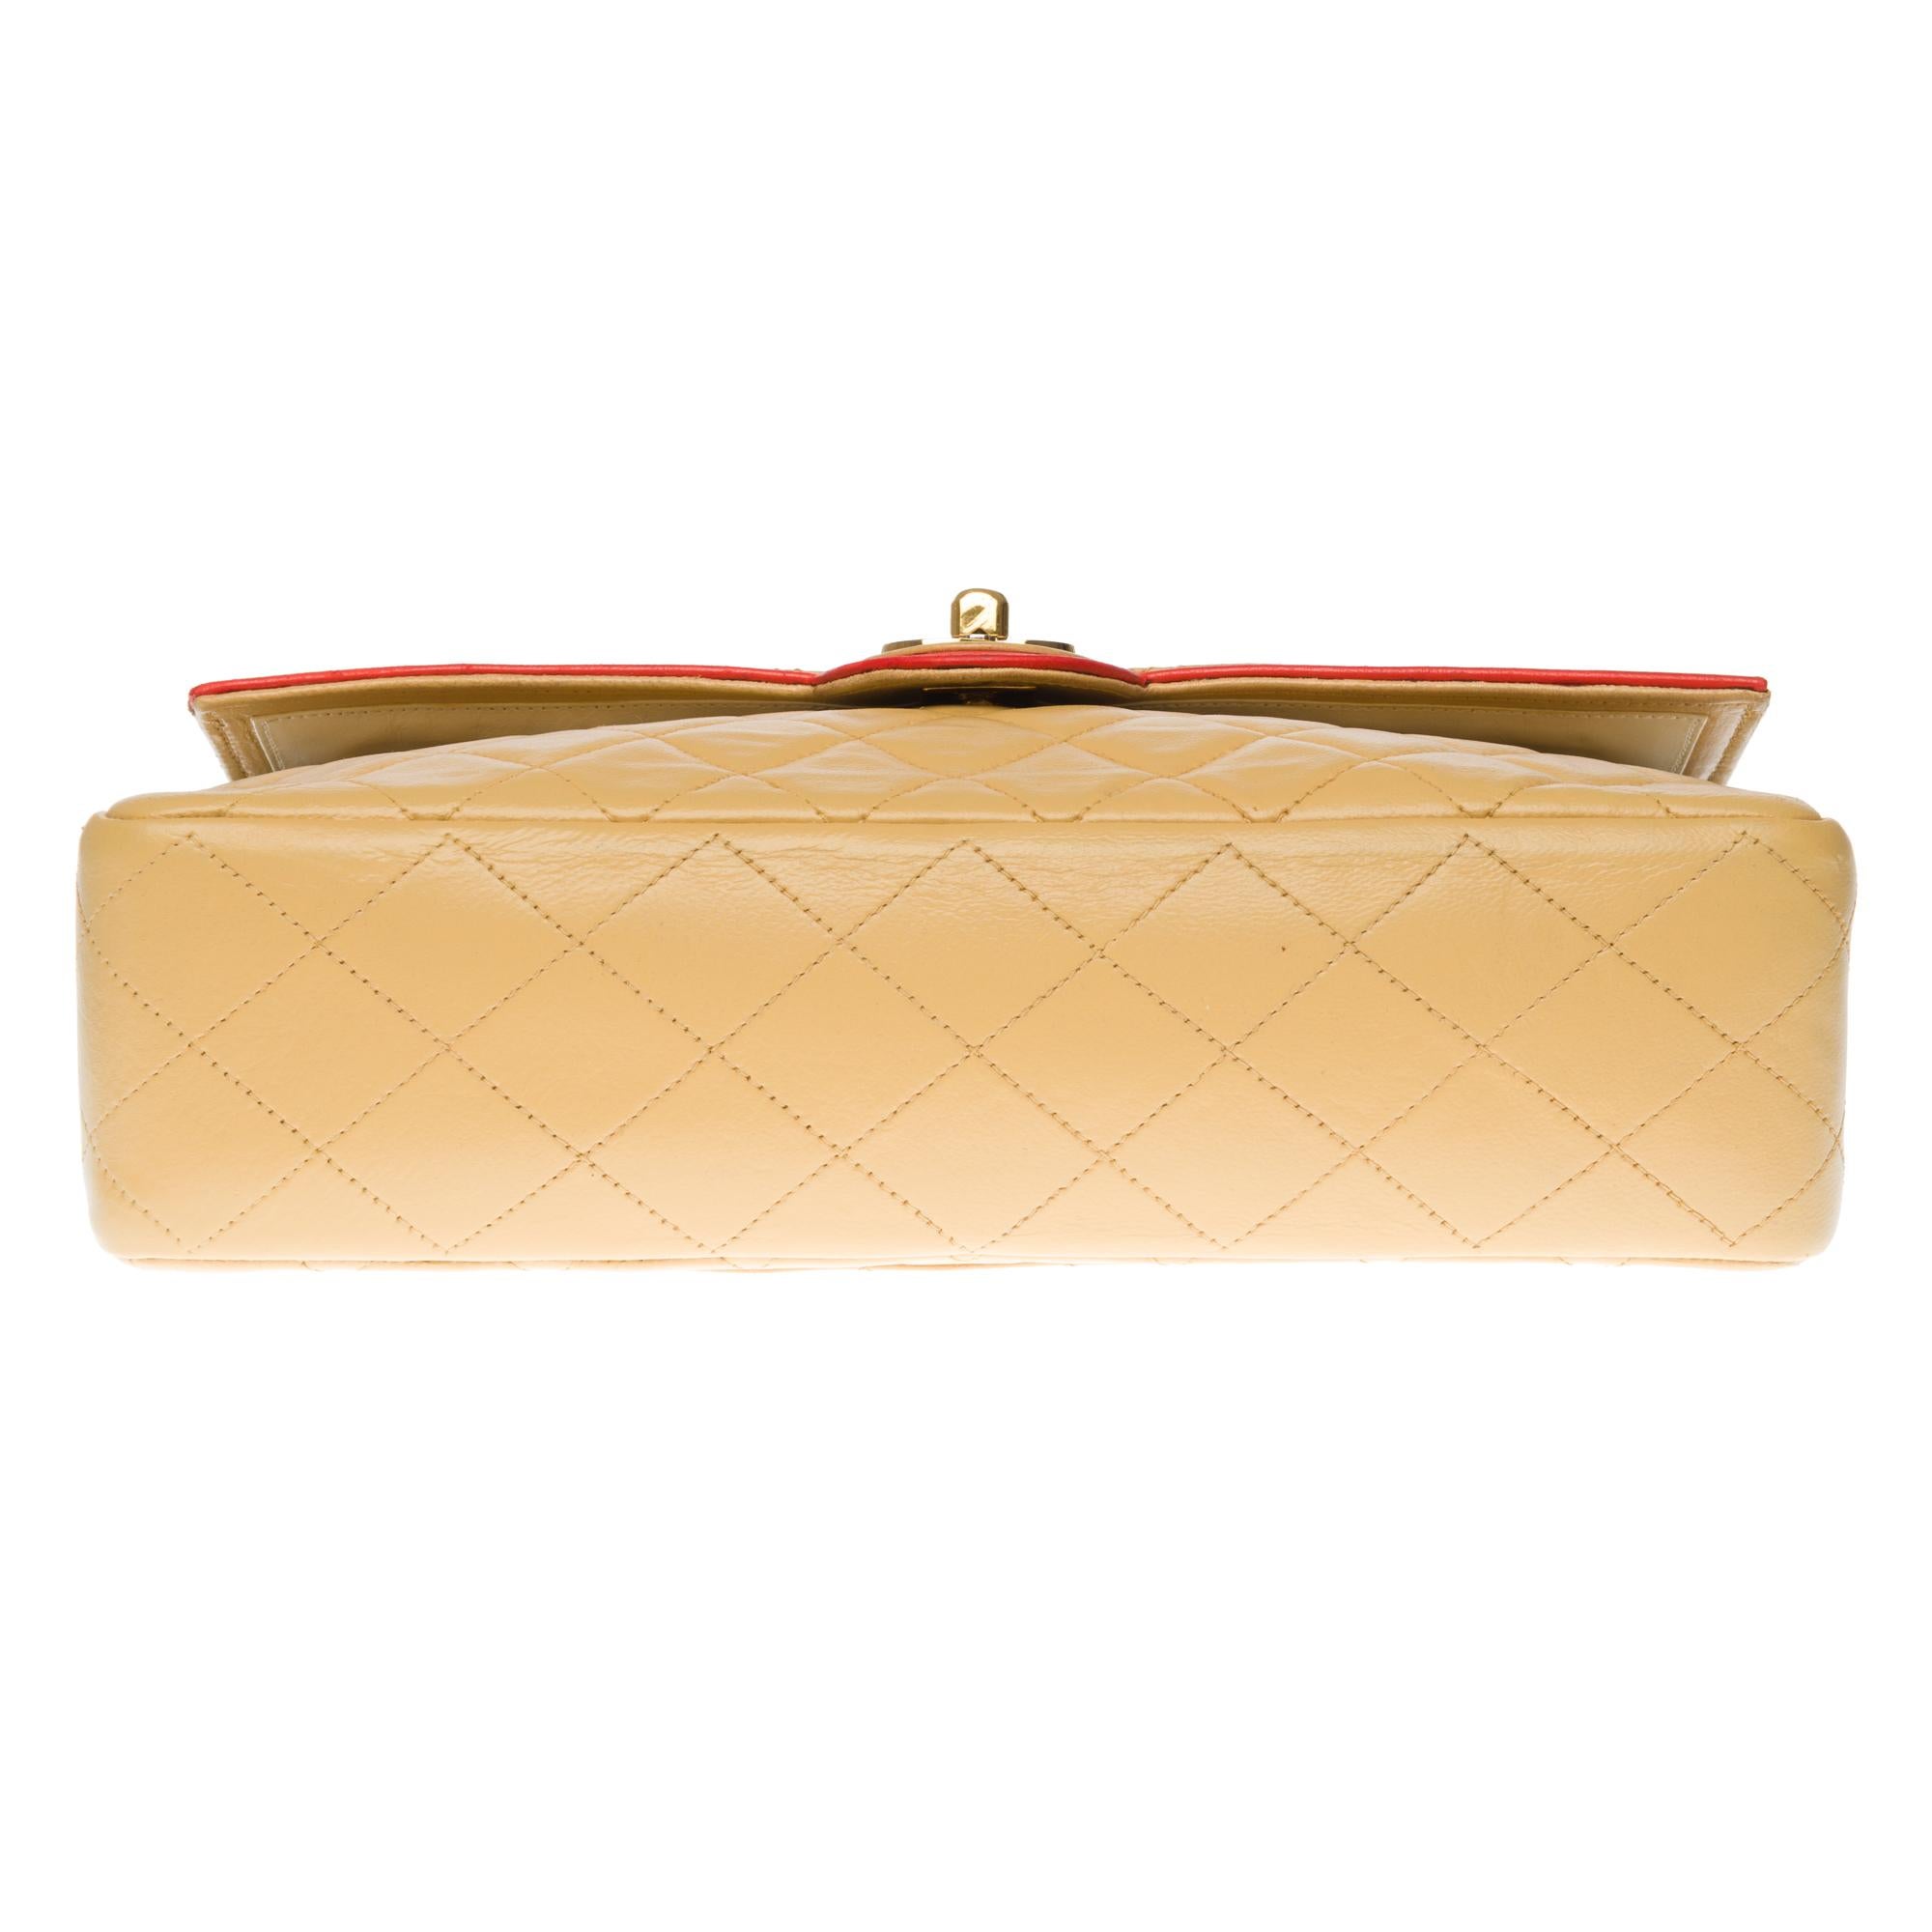 Women's Chanel Classic shoulder bag in beige and coral quilted lambskin with GHW